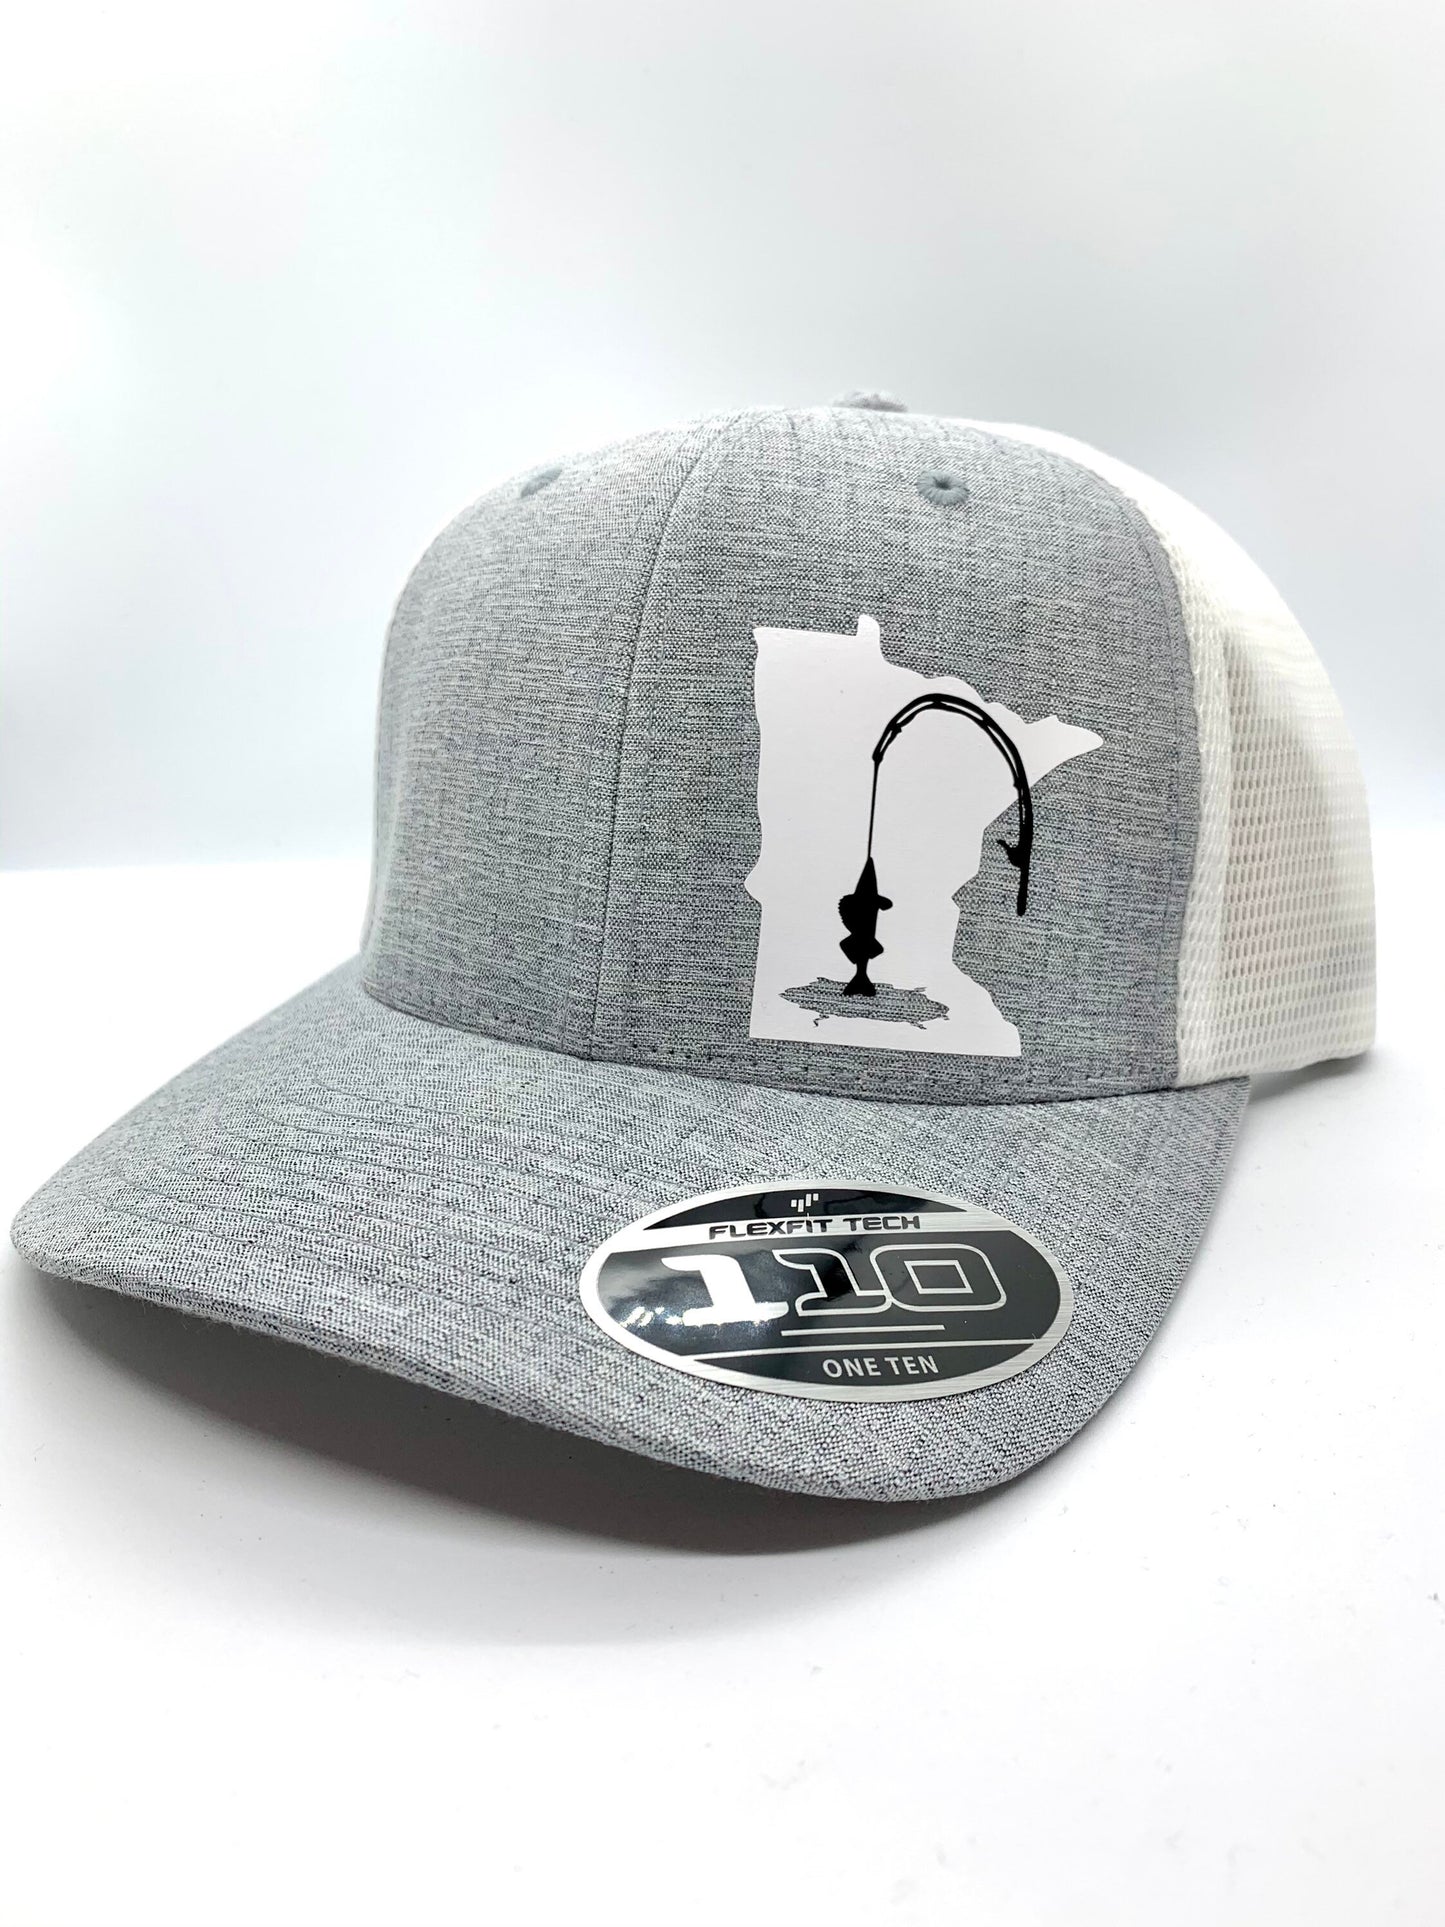 ANY STATE Ice Fishing Snapback Adjustable Hat in Multiple Color Options | Crappie | Walleye